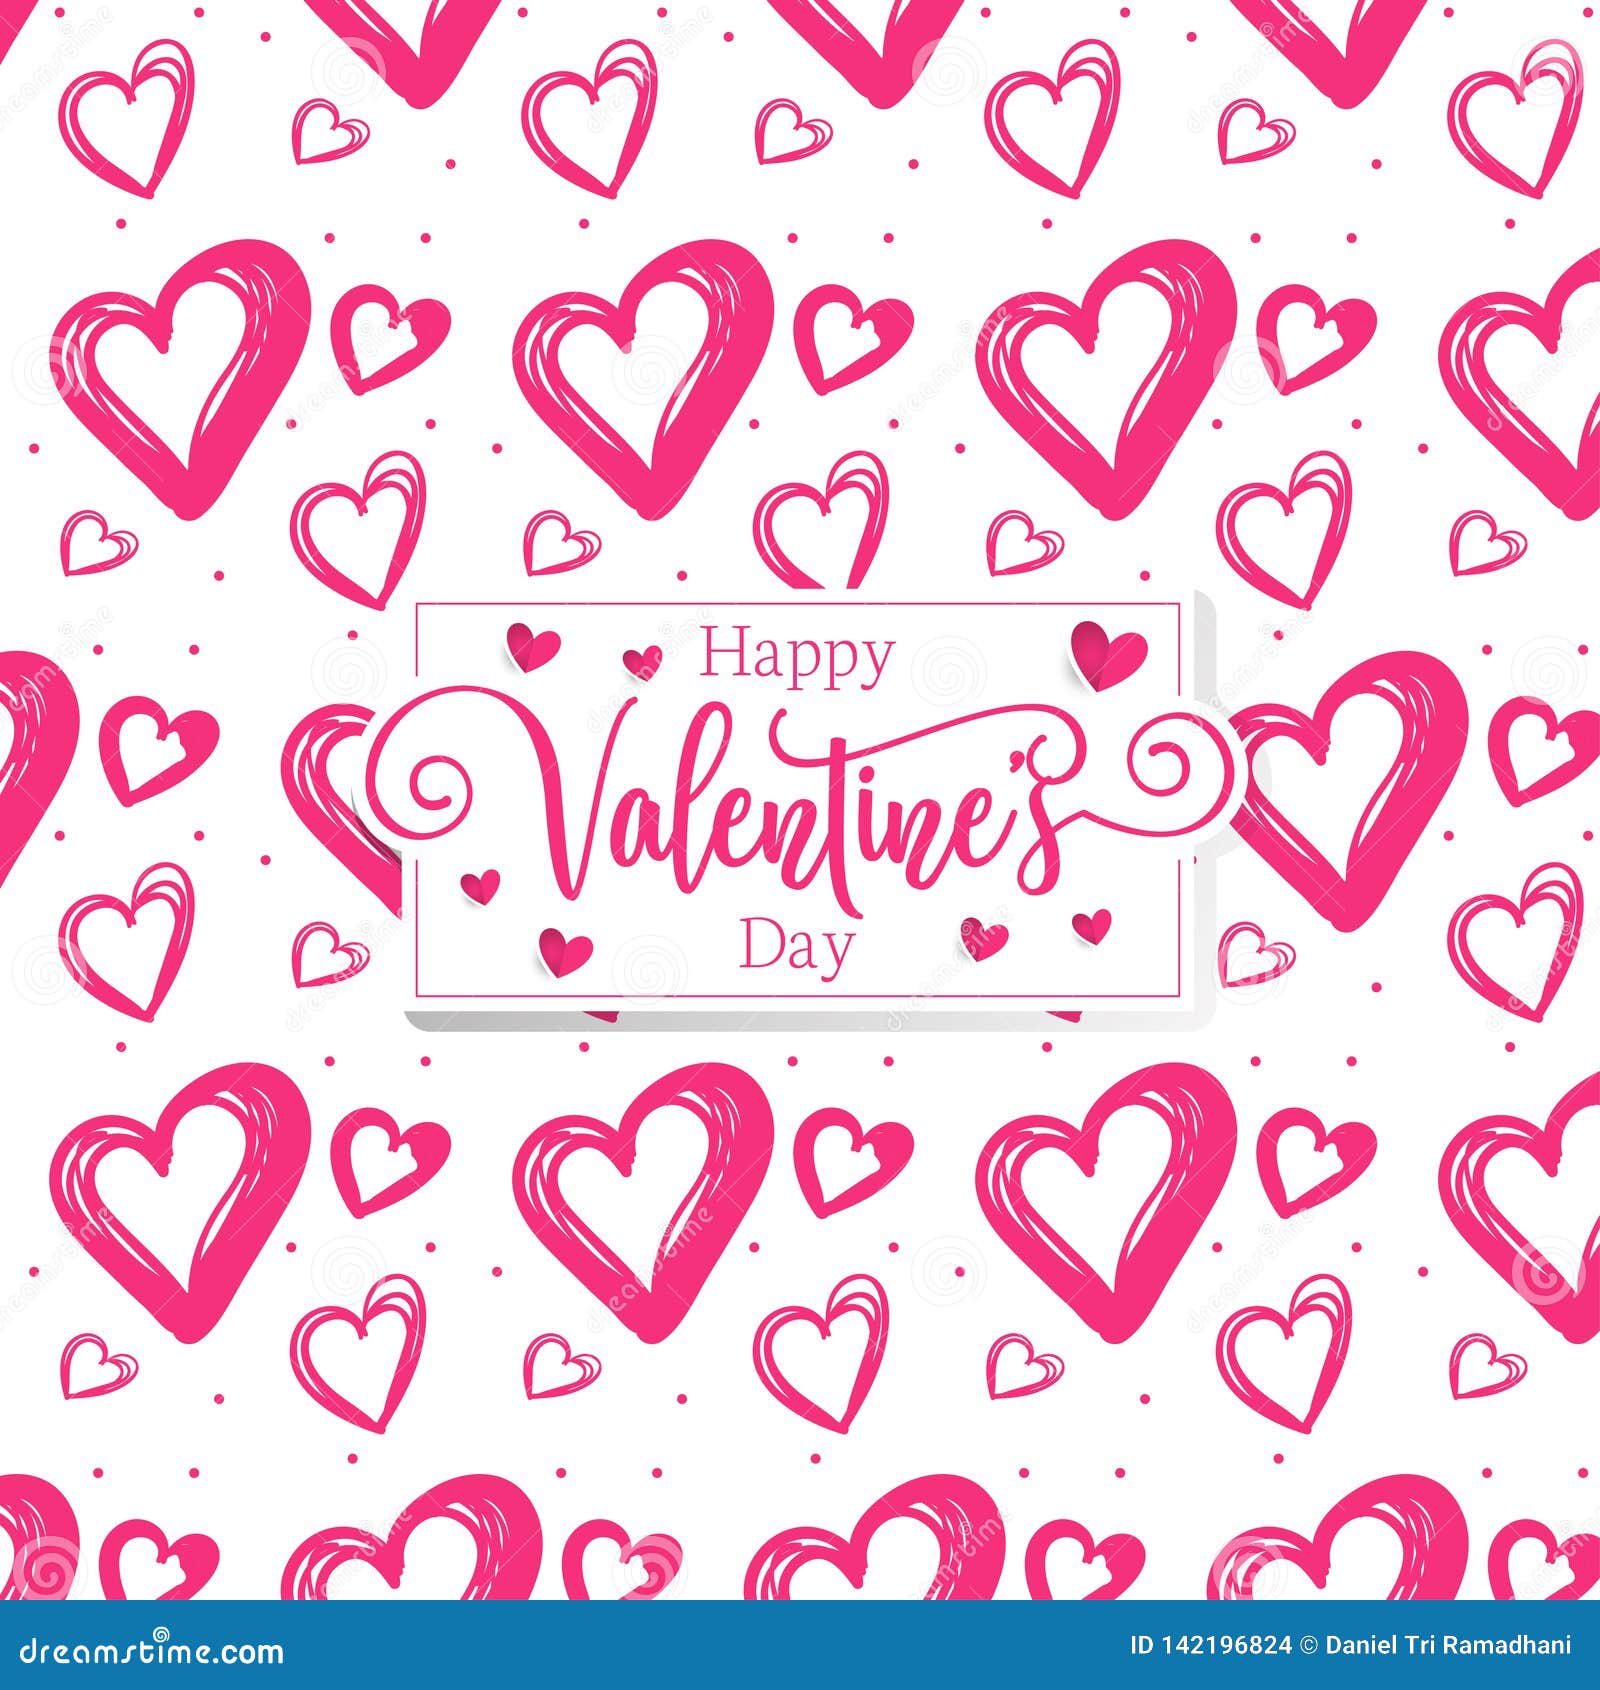 Cute Romantic Hearts Valentine S Day Pattern Background Stock Vector -  Illustration of symbol, shape: 142196824